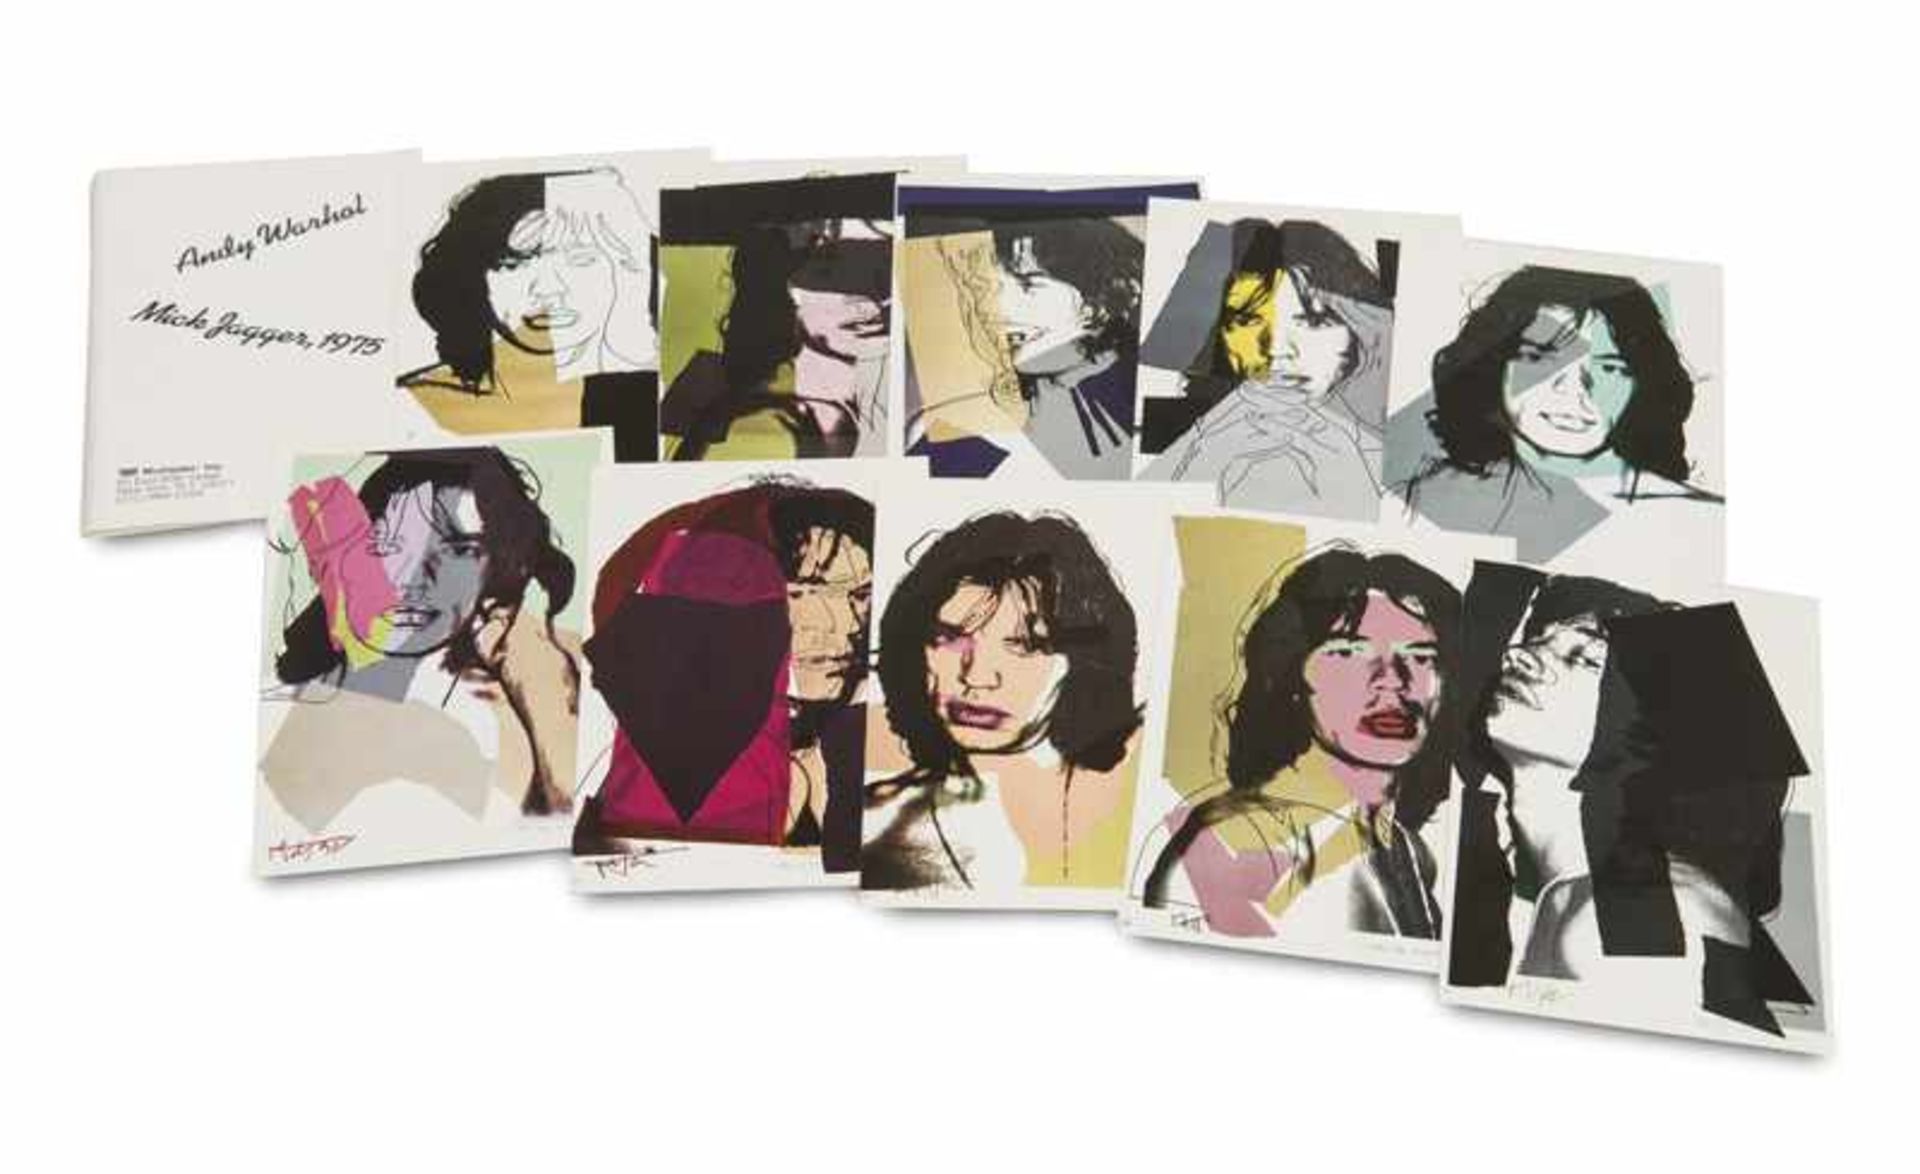 Mick Jagger cards. 1975. Set of 10 offset lithographs in postcard style on light cardboard. Each